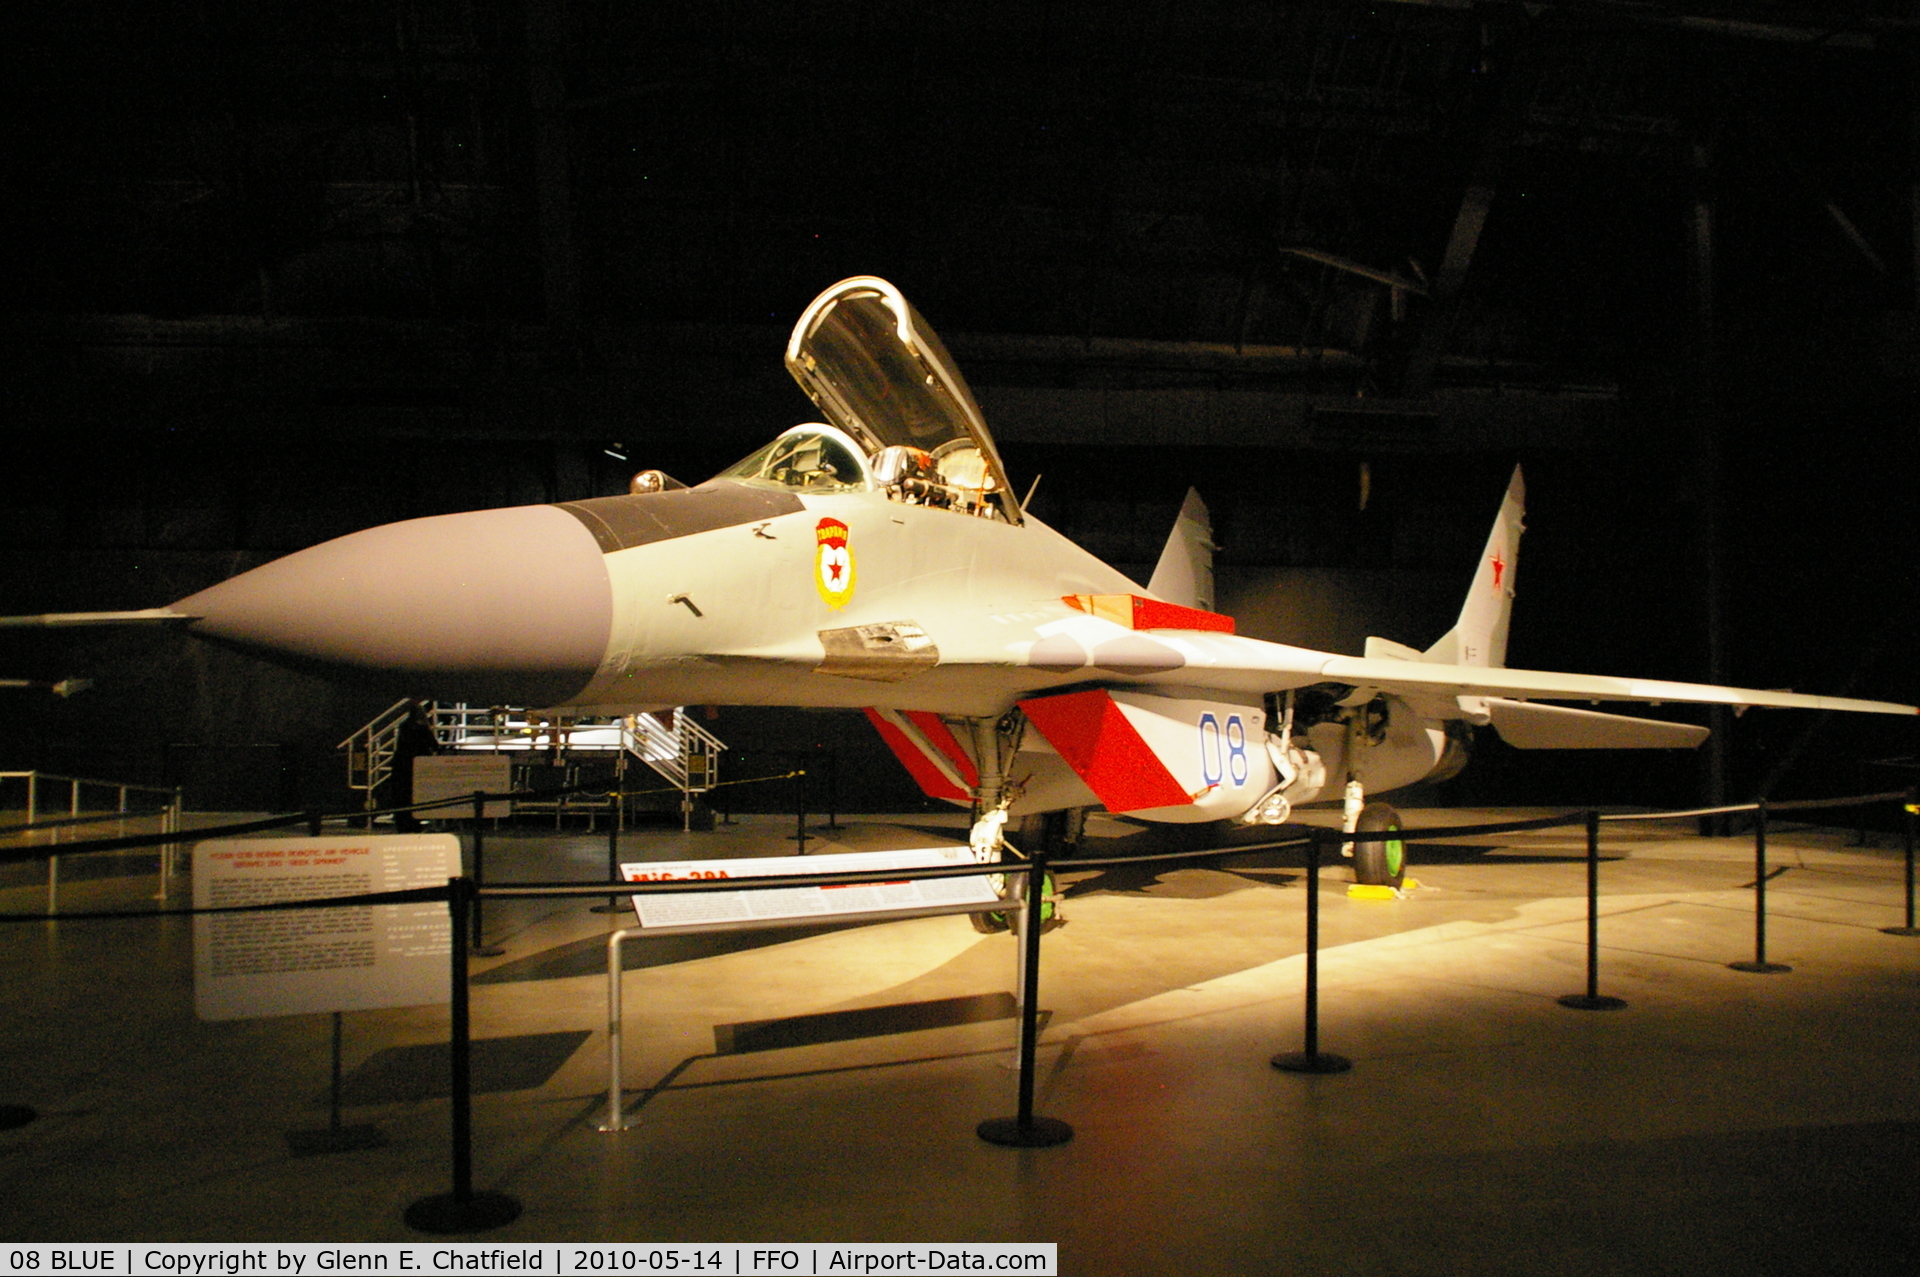 08 BLUE, Mikoyan-Gurevich MiG-29A C/N 2960516761, At the National Museum of the USAF.